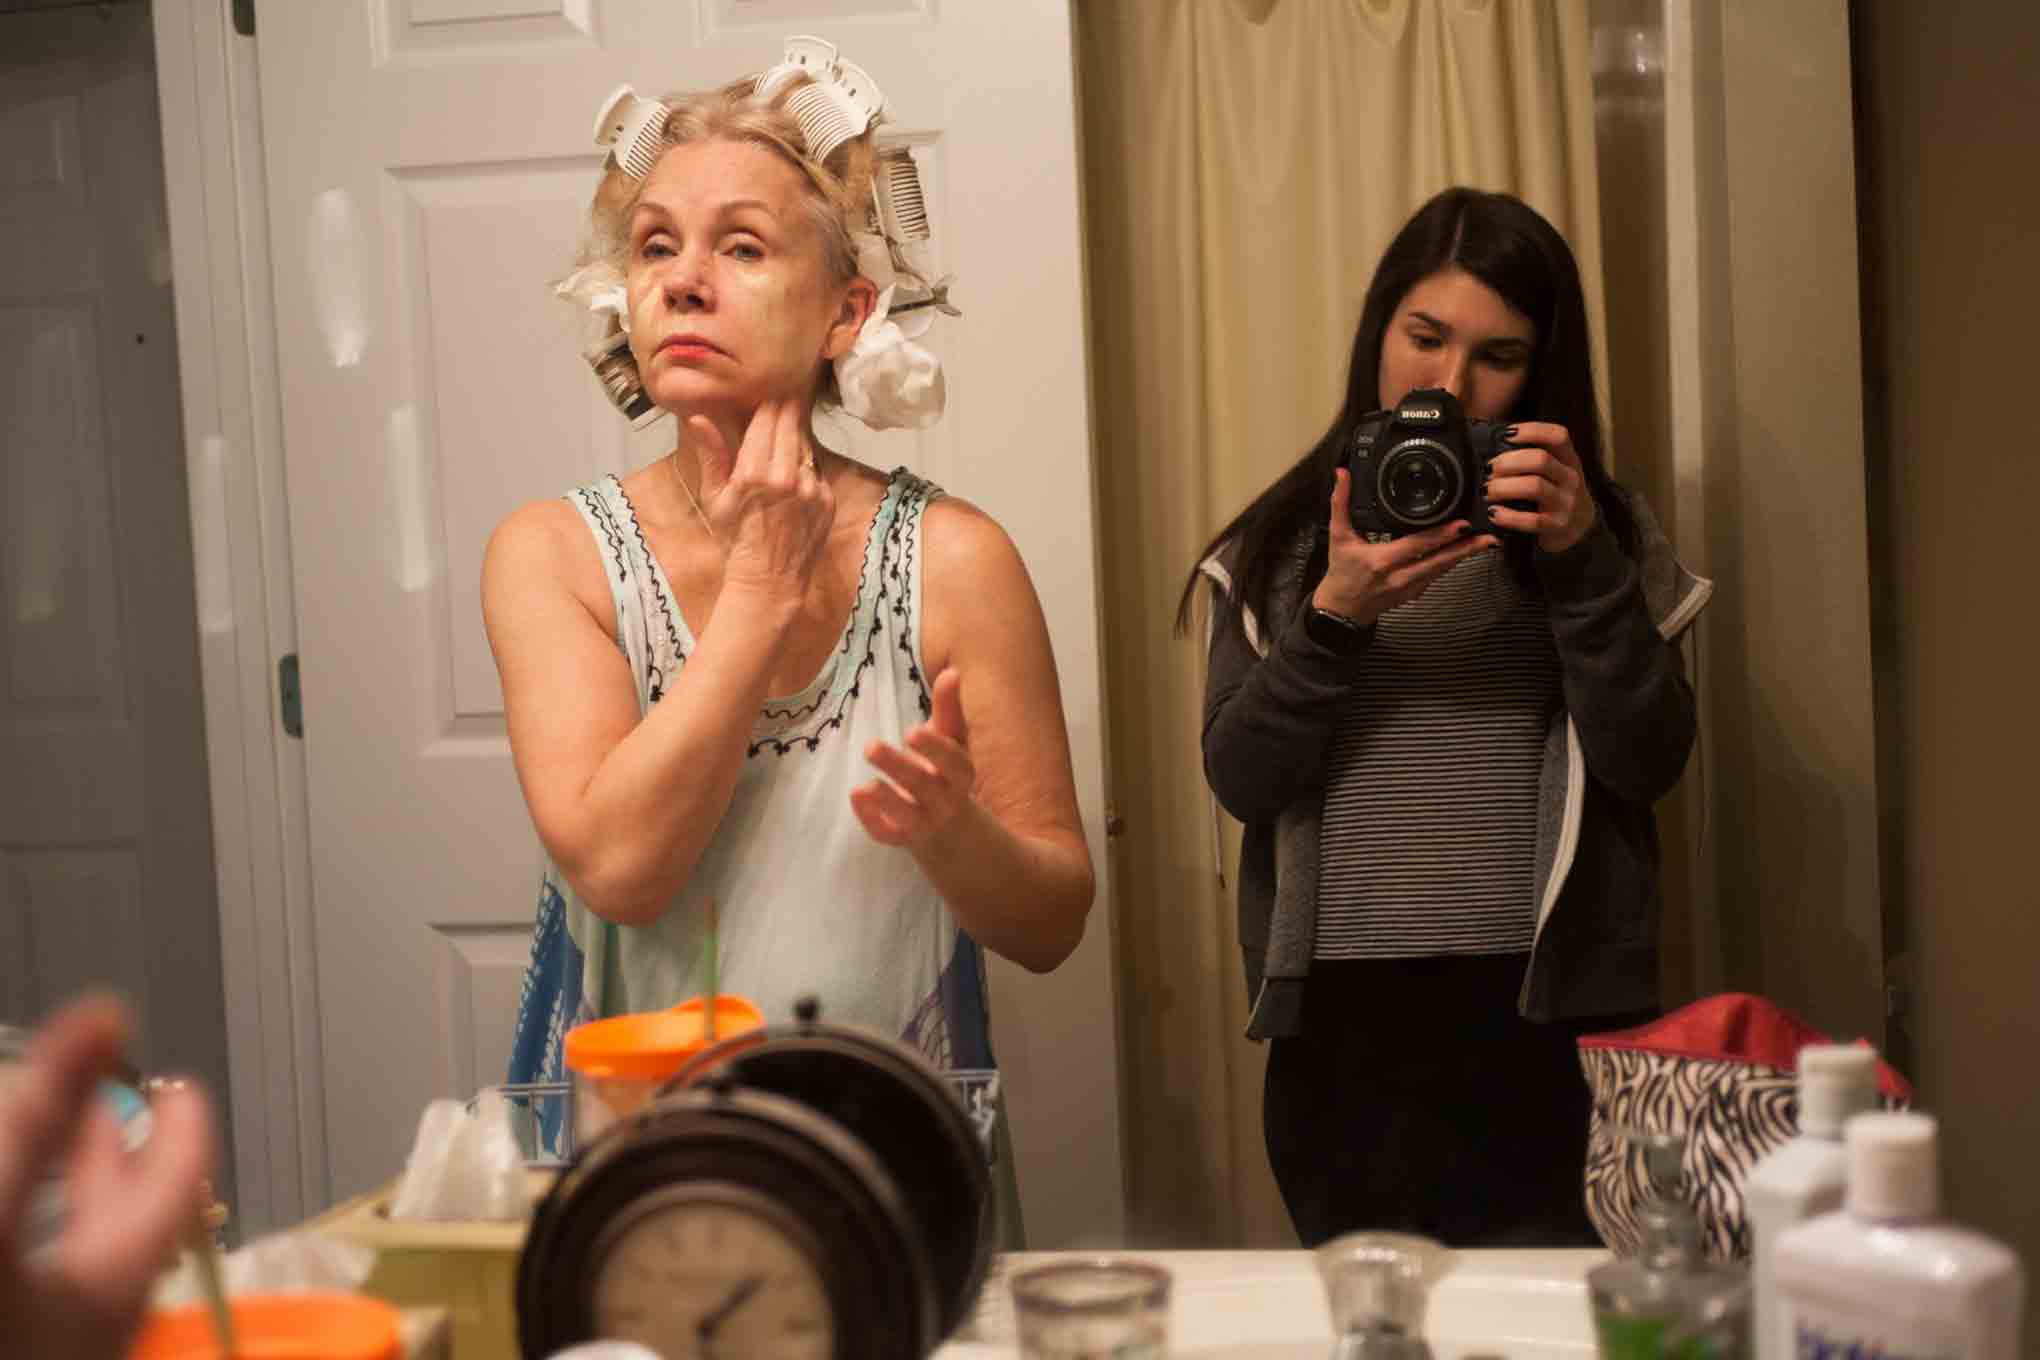 Spitz calls this photo of her mother applying makeup Mom’s Mask